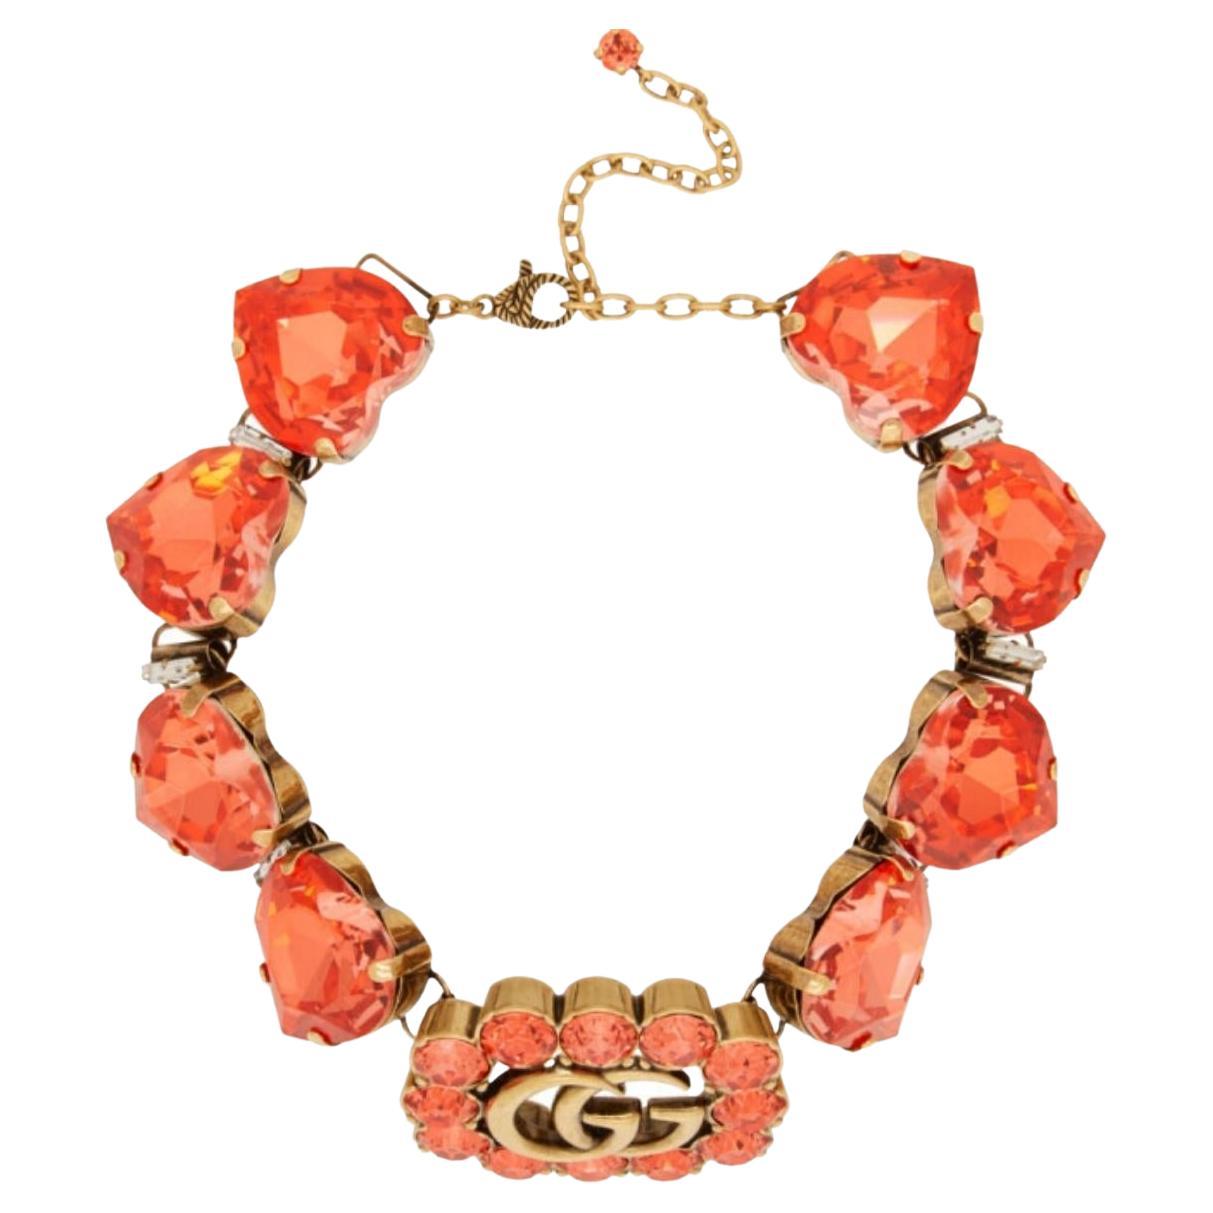 A signature emblem of the House, the initials of its founder Guccio Gucci define this necklace, embellished with heart-shaped crystals. Adding a refined feel, sparkling crystals frame the logo crafted from metal with an aged gold